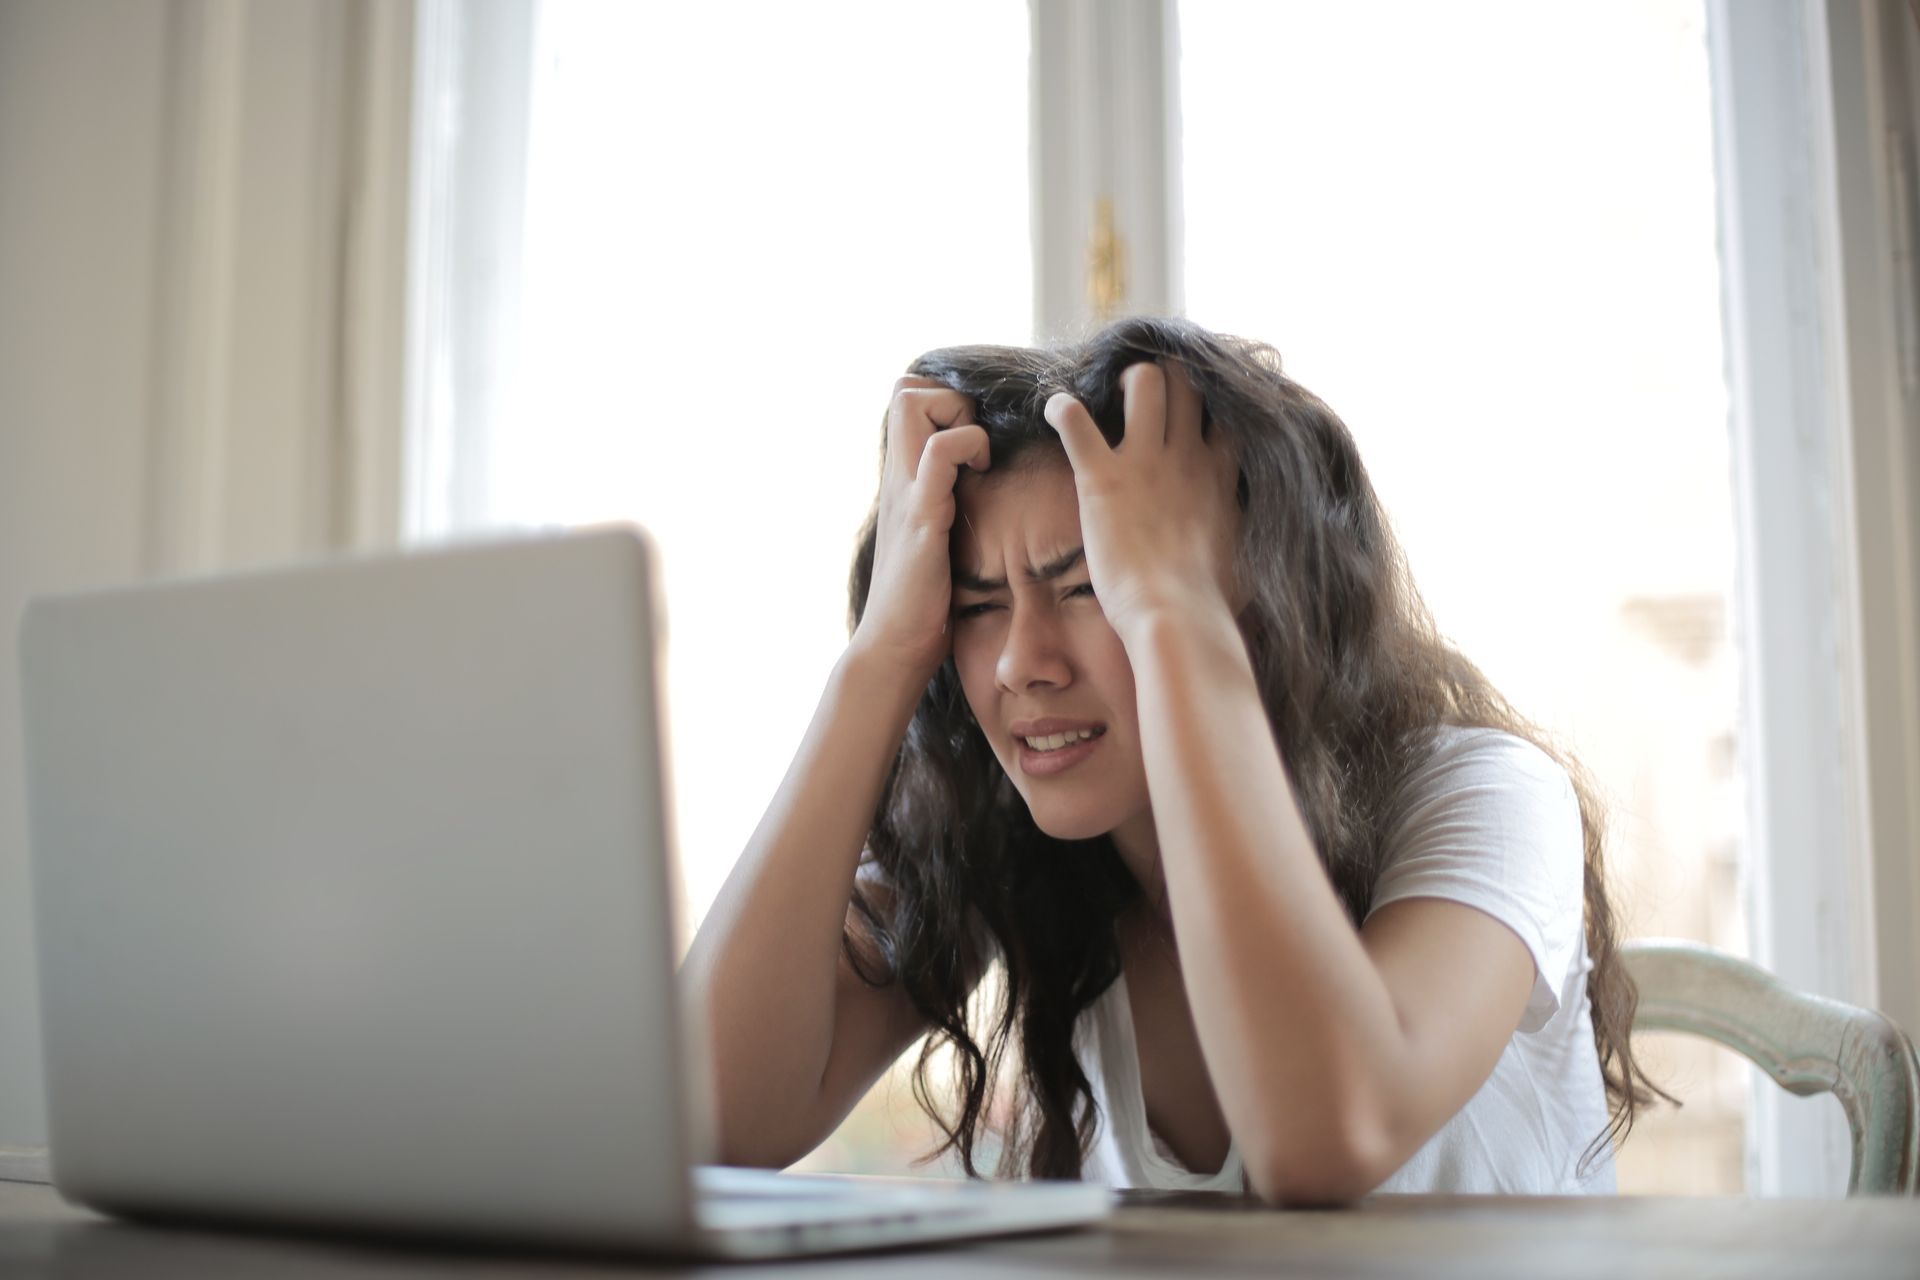 A woman squinting at her computer and looking frustrated because of glare on the screen.